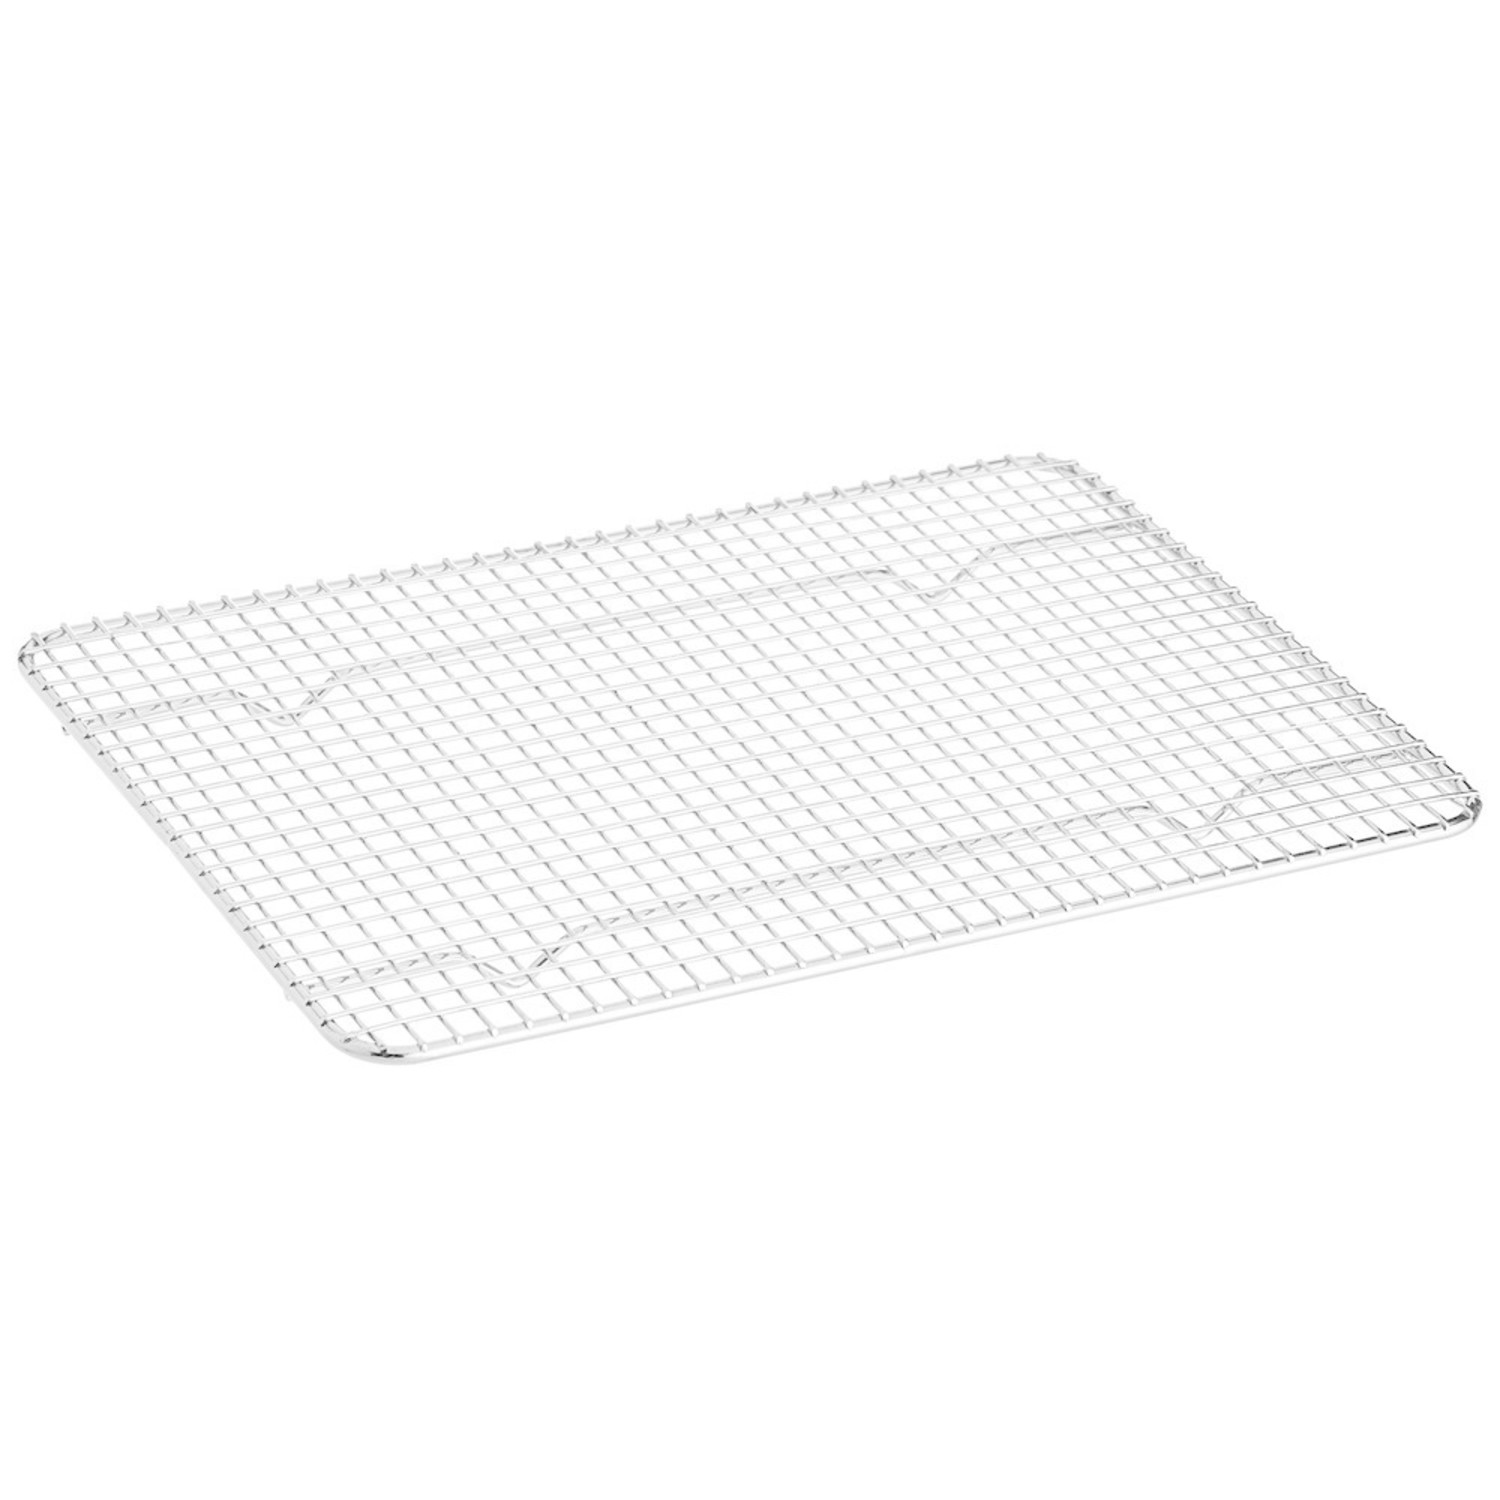 Stainless Steel Baking & Cooling Wire Rack-8-1/2 x 12 Fits